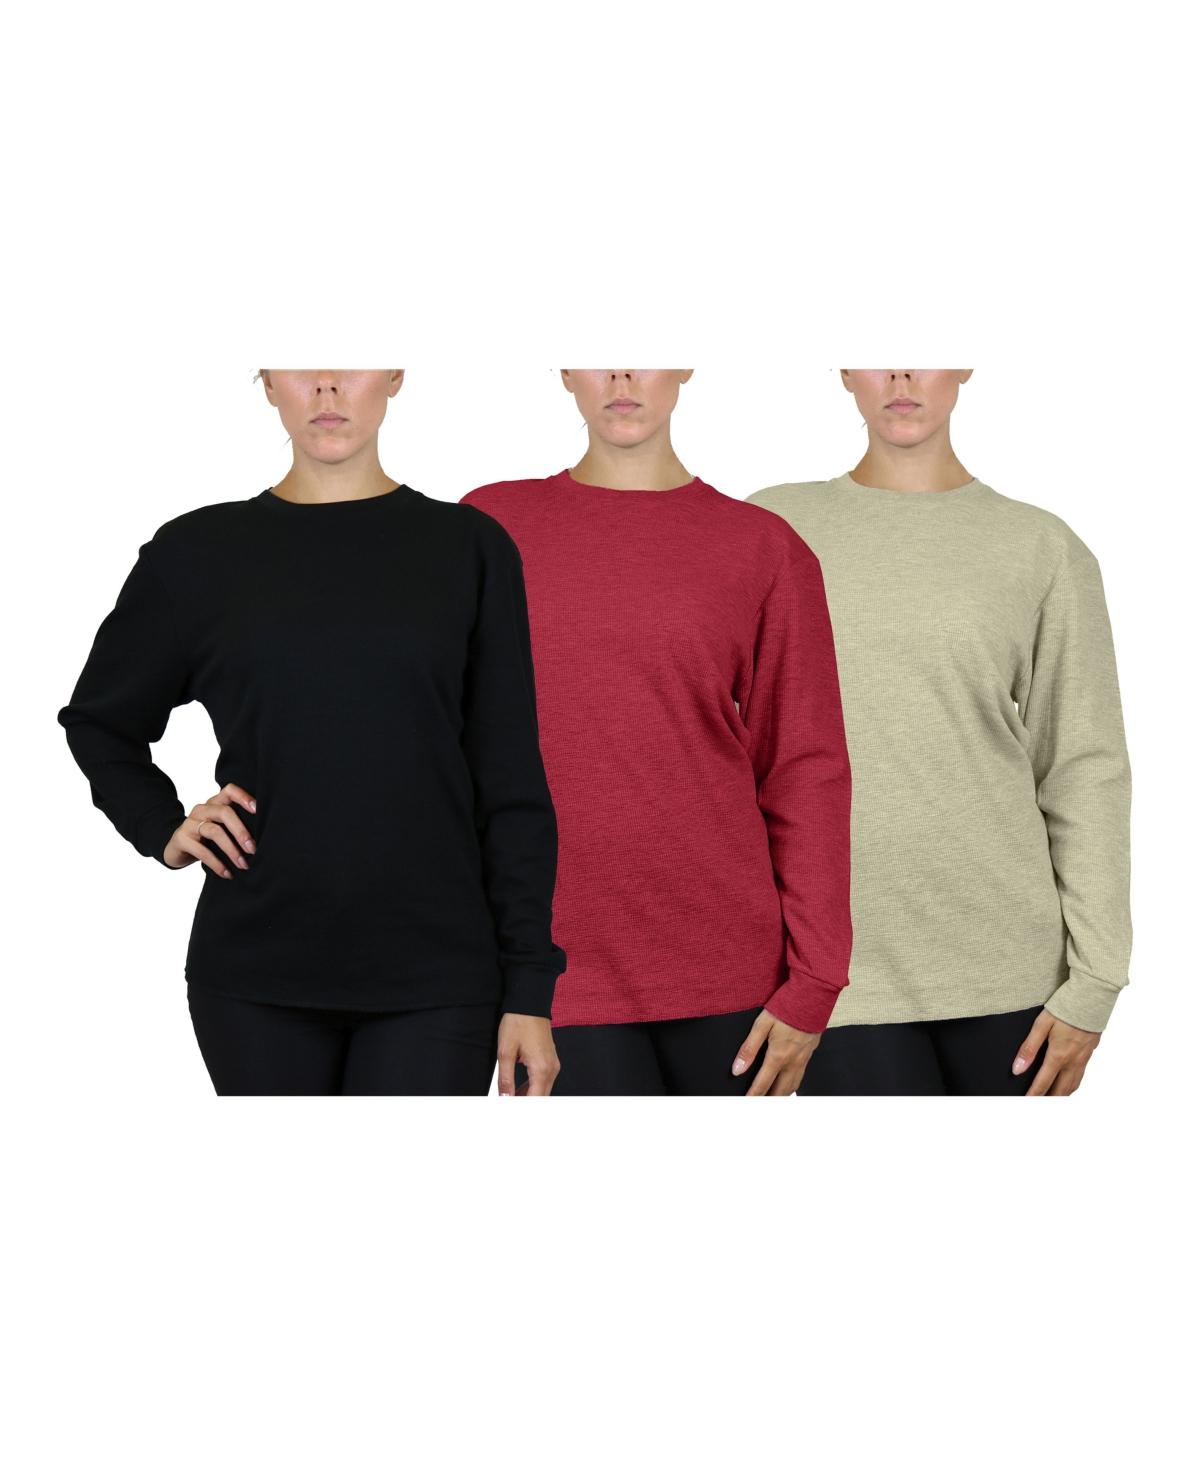 Galaxy By Harvic Loose Fit Waffle Knit Thermal Shirt in Red | Lyst